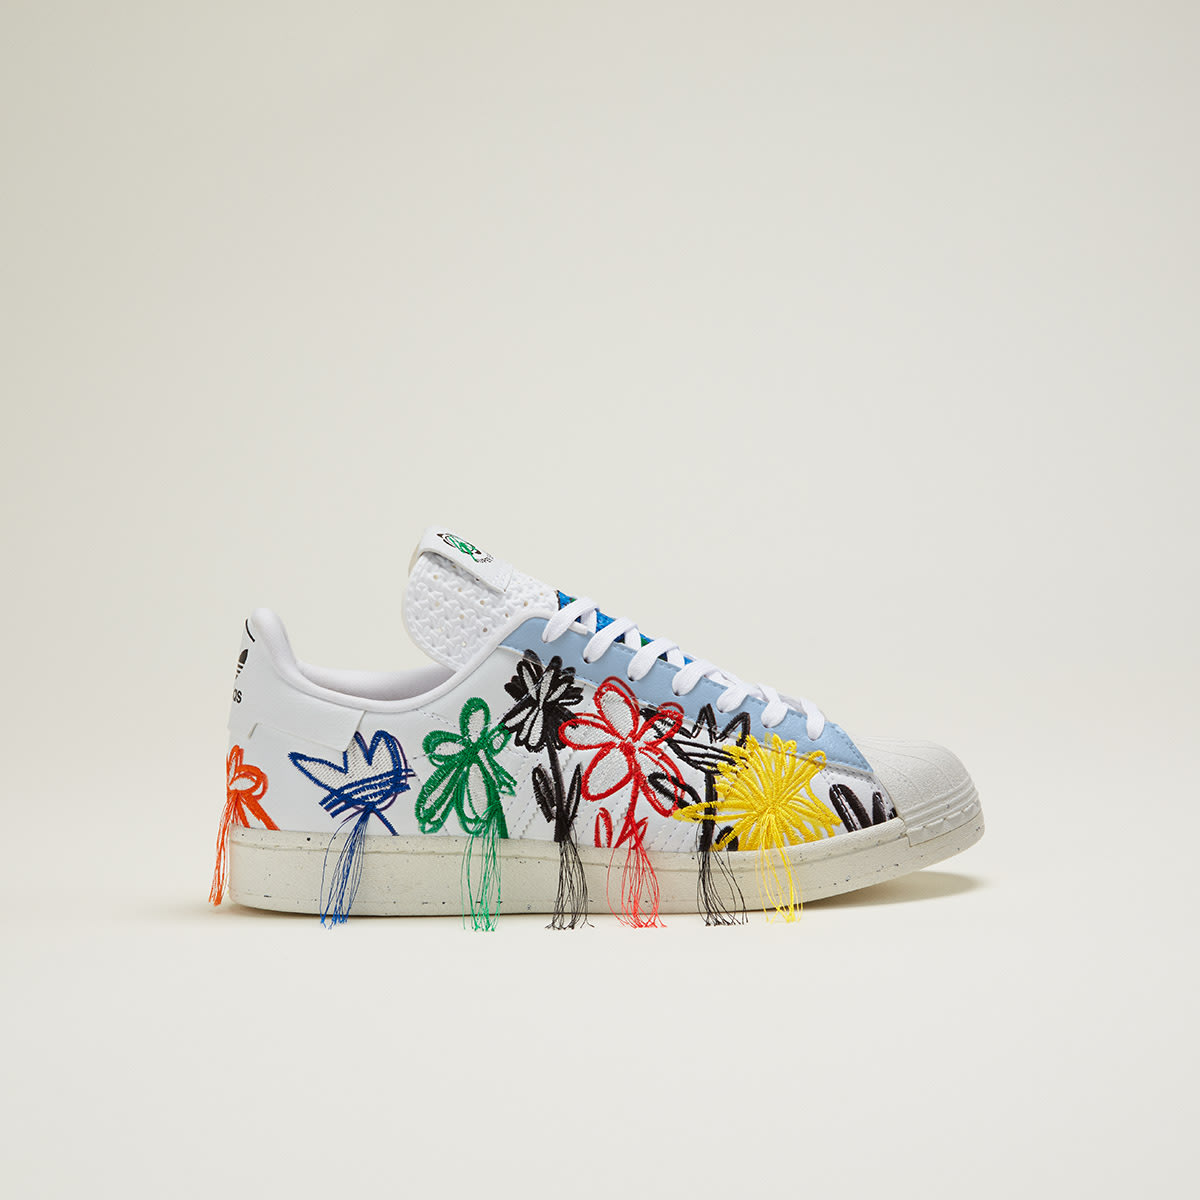 Adidas x Sean Wotherspoon Superstar Superearth Sneakers - Farfetch